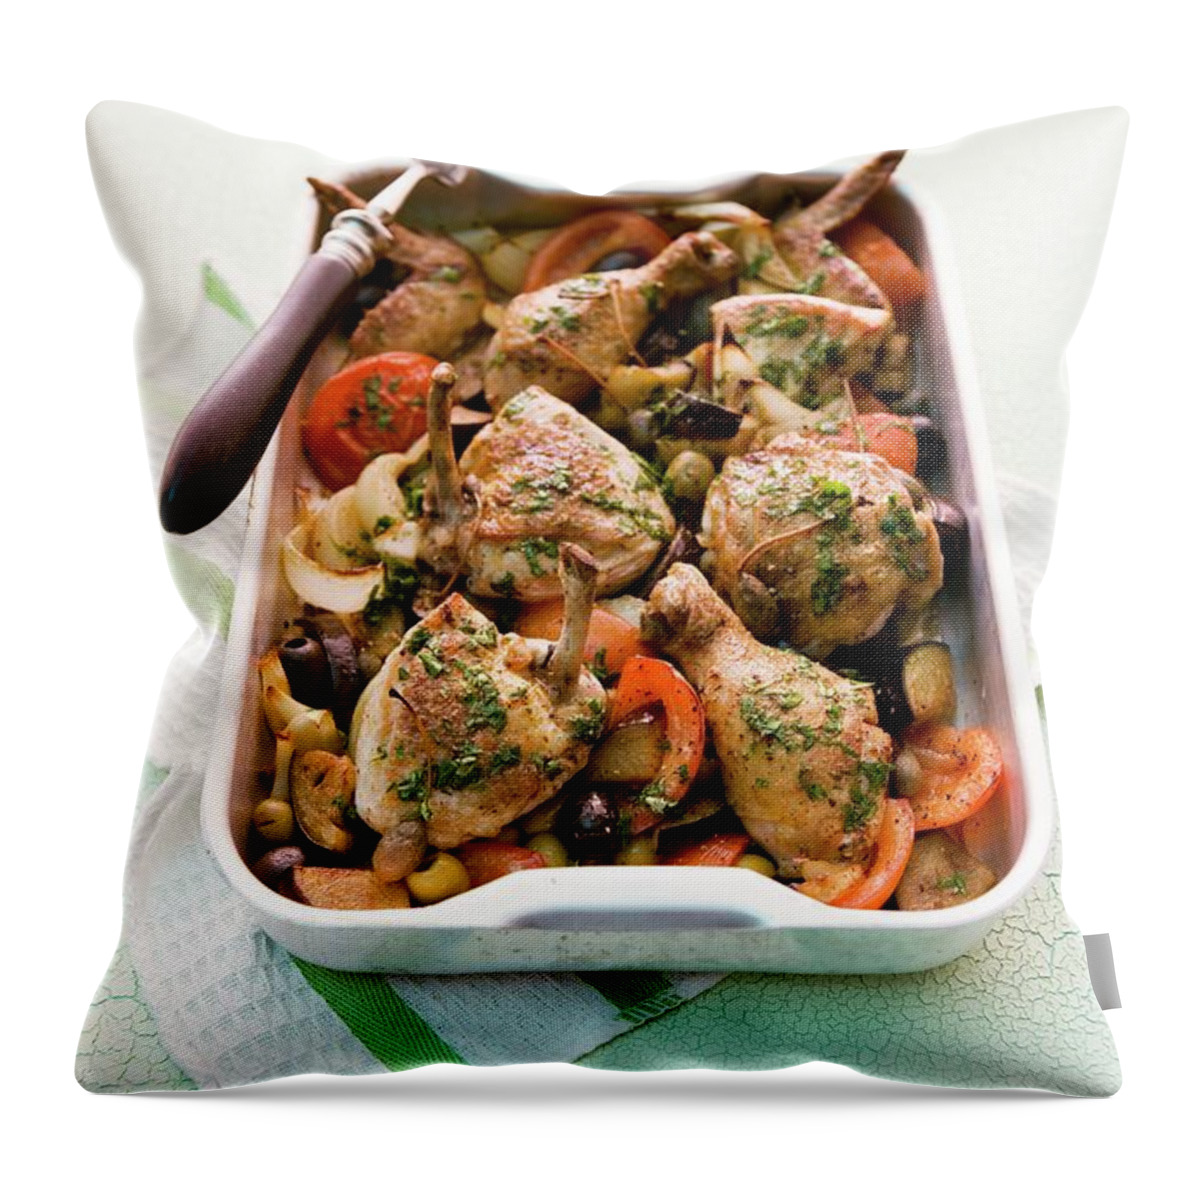 Ip_11283622 Throw Pillow featuring the photograph Chicken Caponata by Michael Wissing